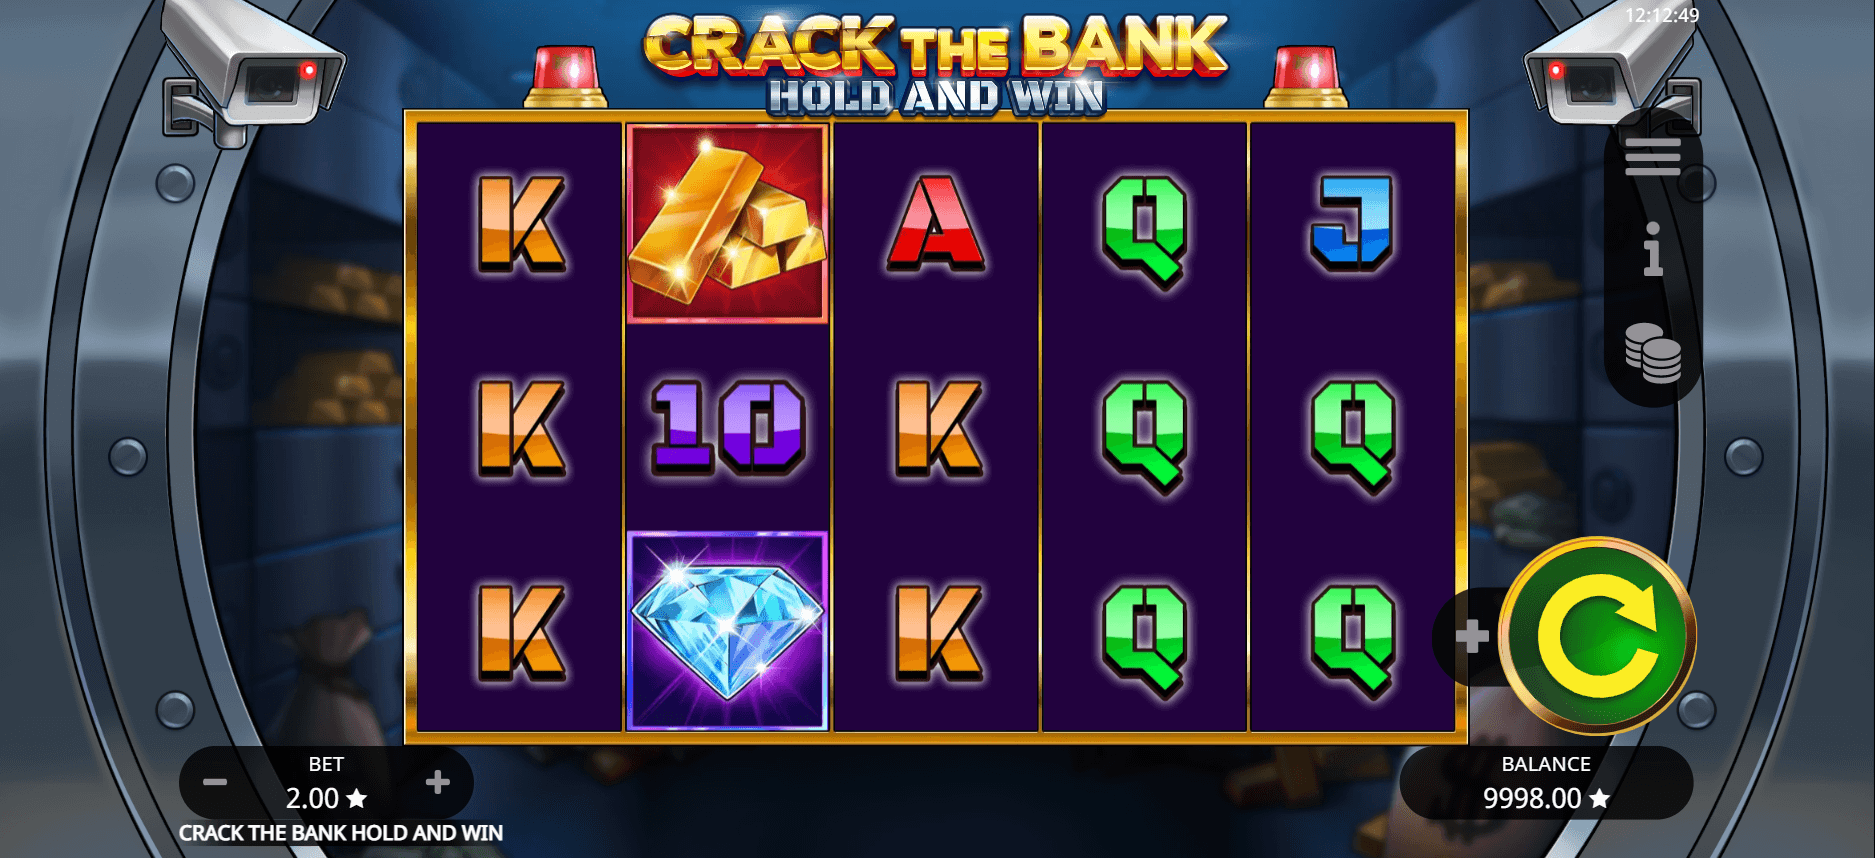 Crack the bank hold and win